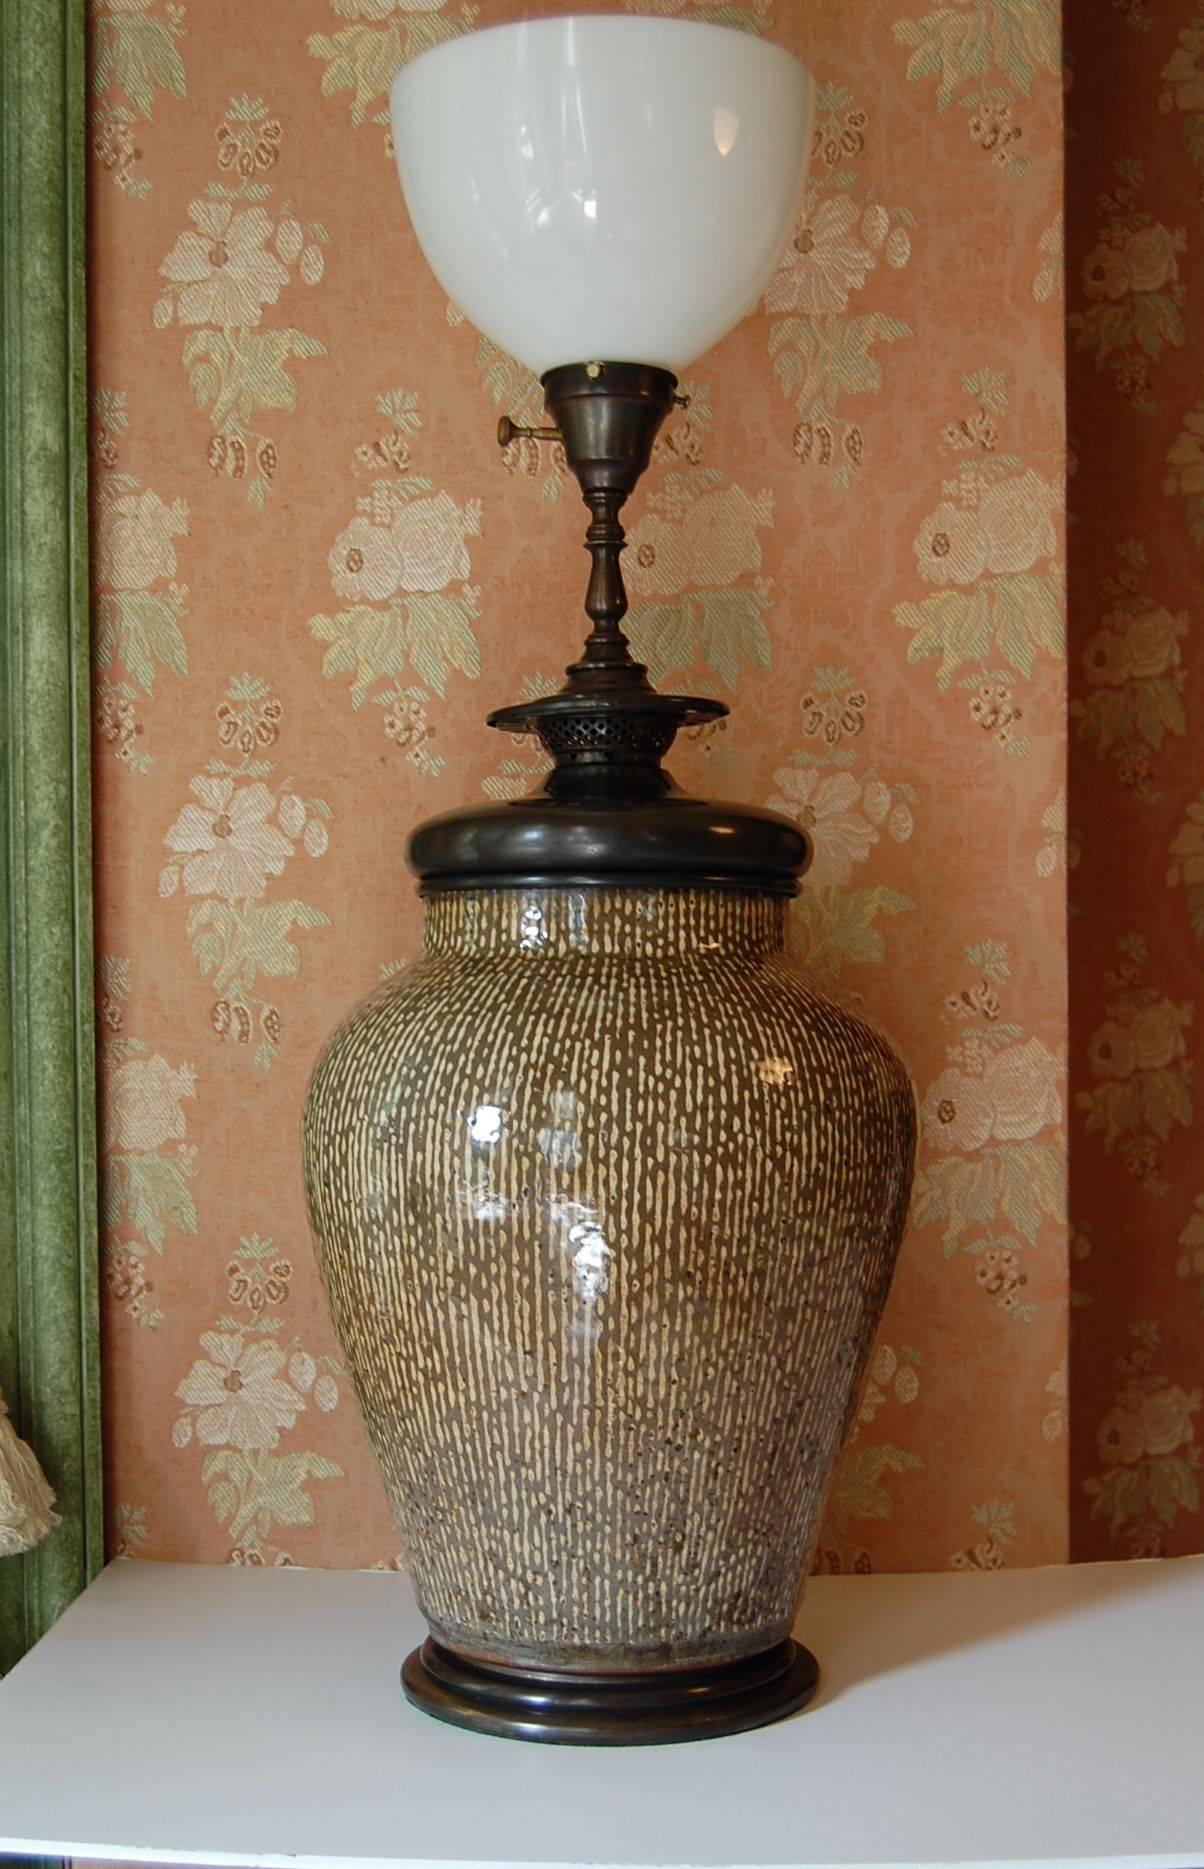 Wonderful large Asian, possibly Chinese or Korean urn wired as a lamp with original turn of the century brass base and fittings. Olive and ecru colored strie' glaze. Just cleaned and rewired with a three-way socket. Measures: 15